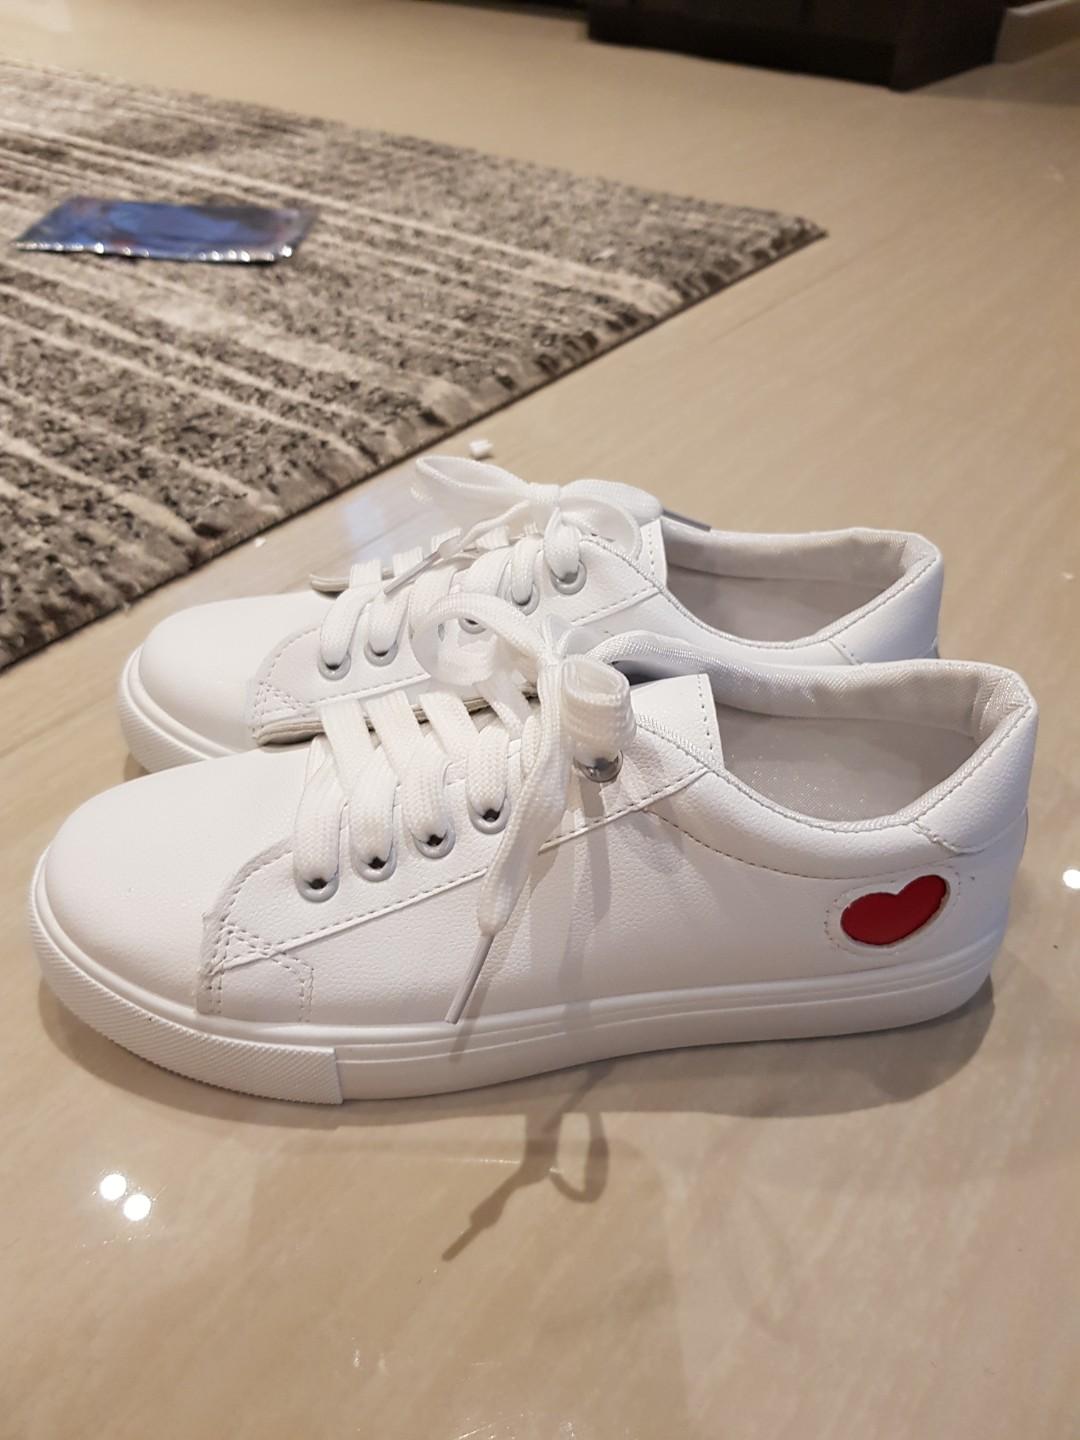 white shoes with red heart